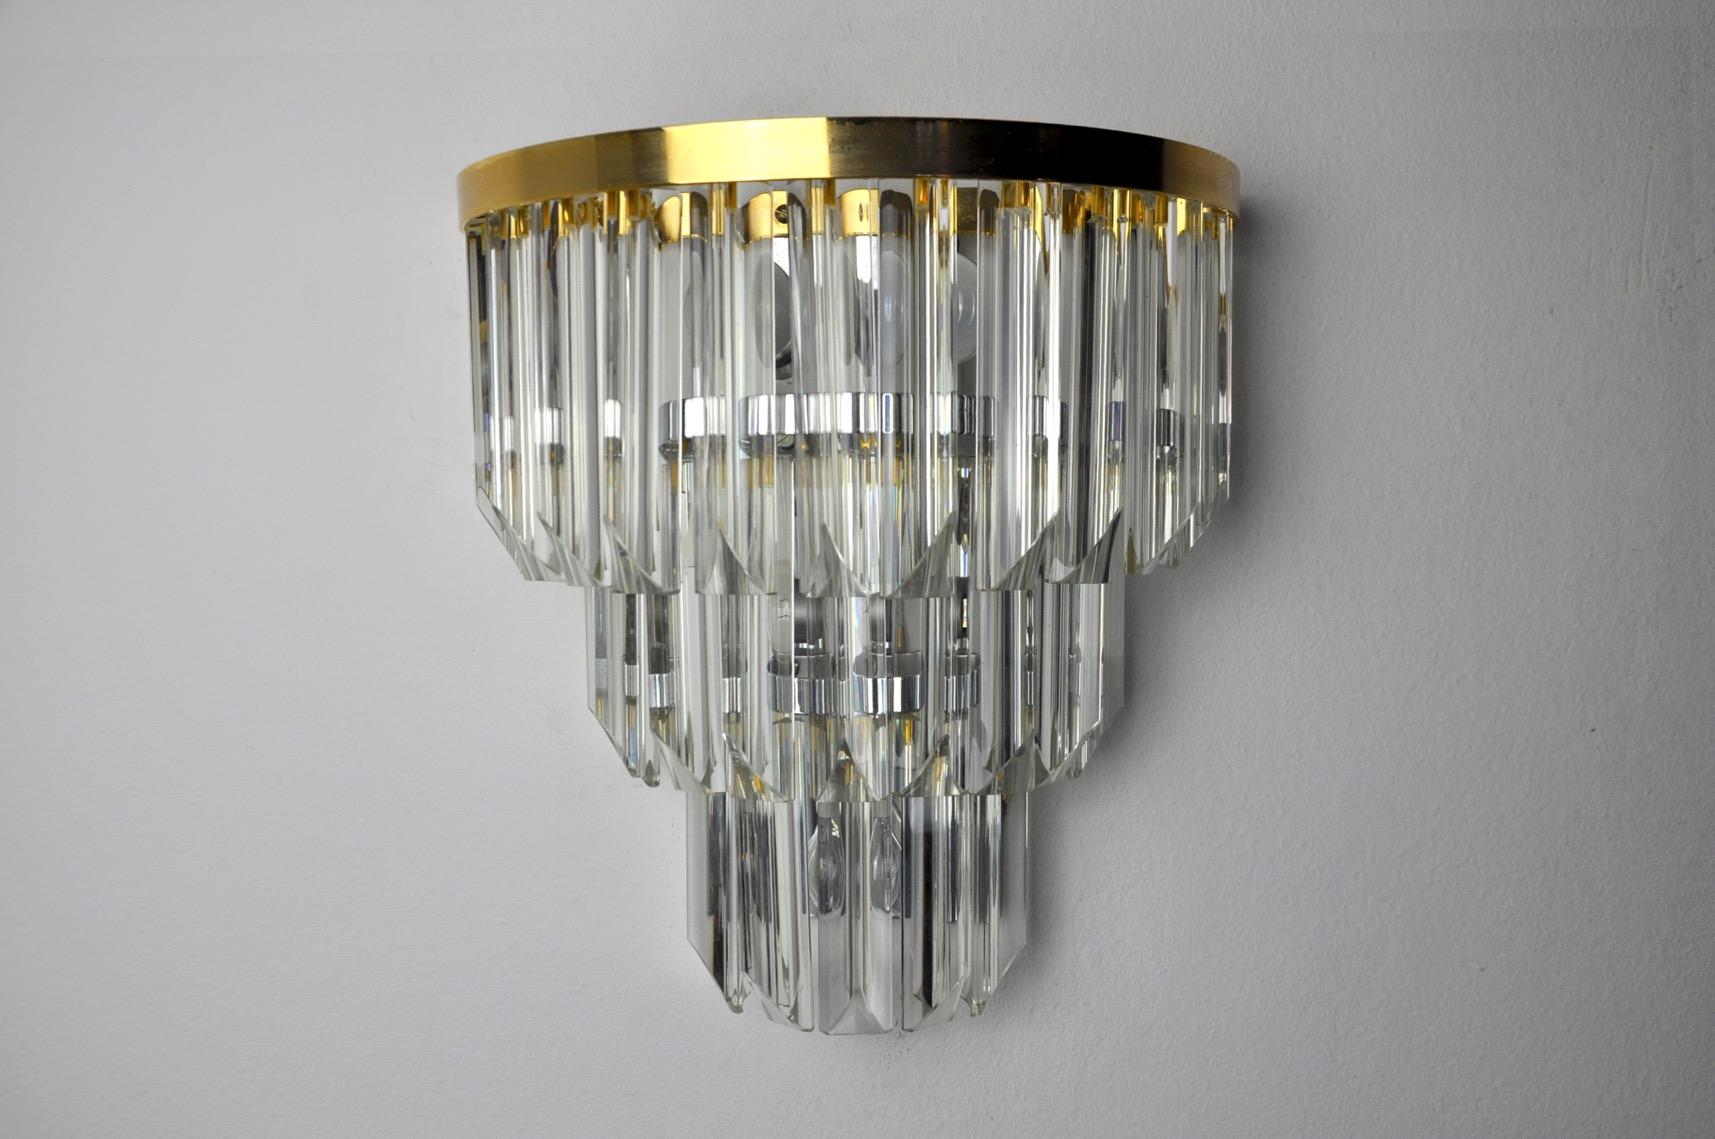 Very beautiful and small wall lamp from Venini dating from the 70s. Cut glass and golden metal structure. Unique object that will illuminate and bring a real design touch to your interior. Electricity verified, mark of time relative to the age of